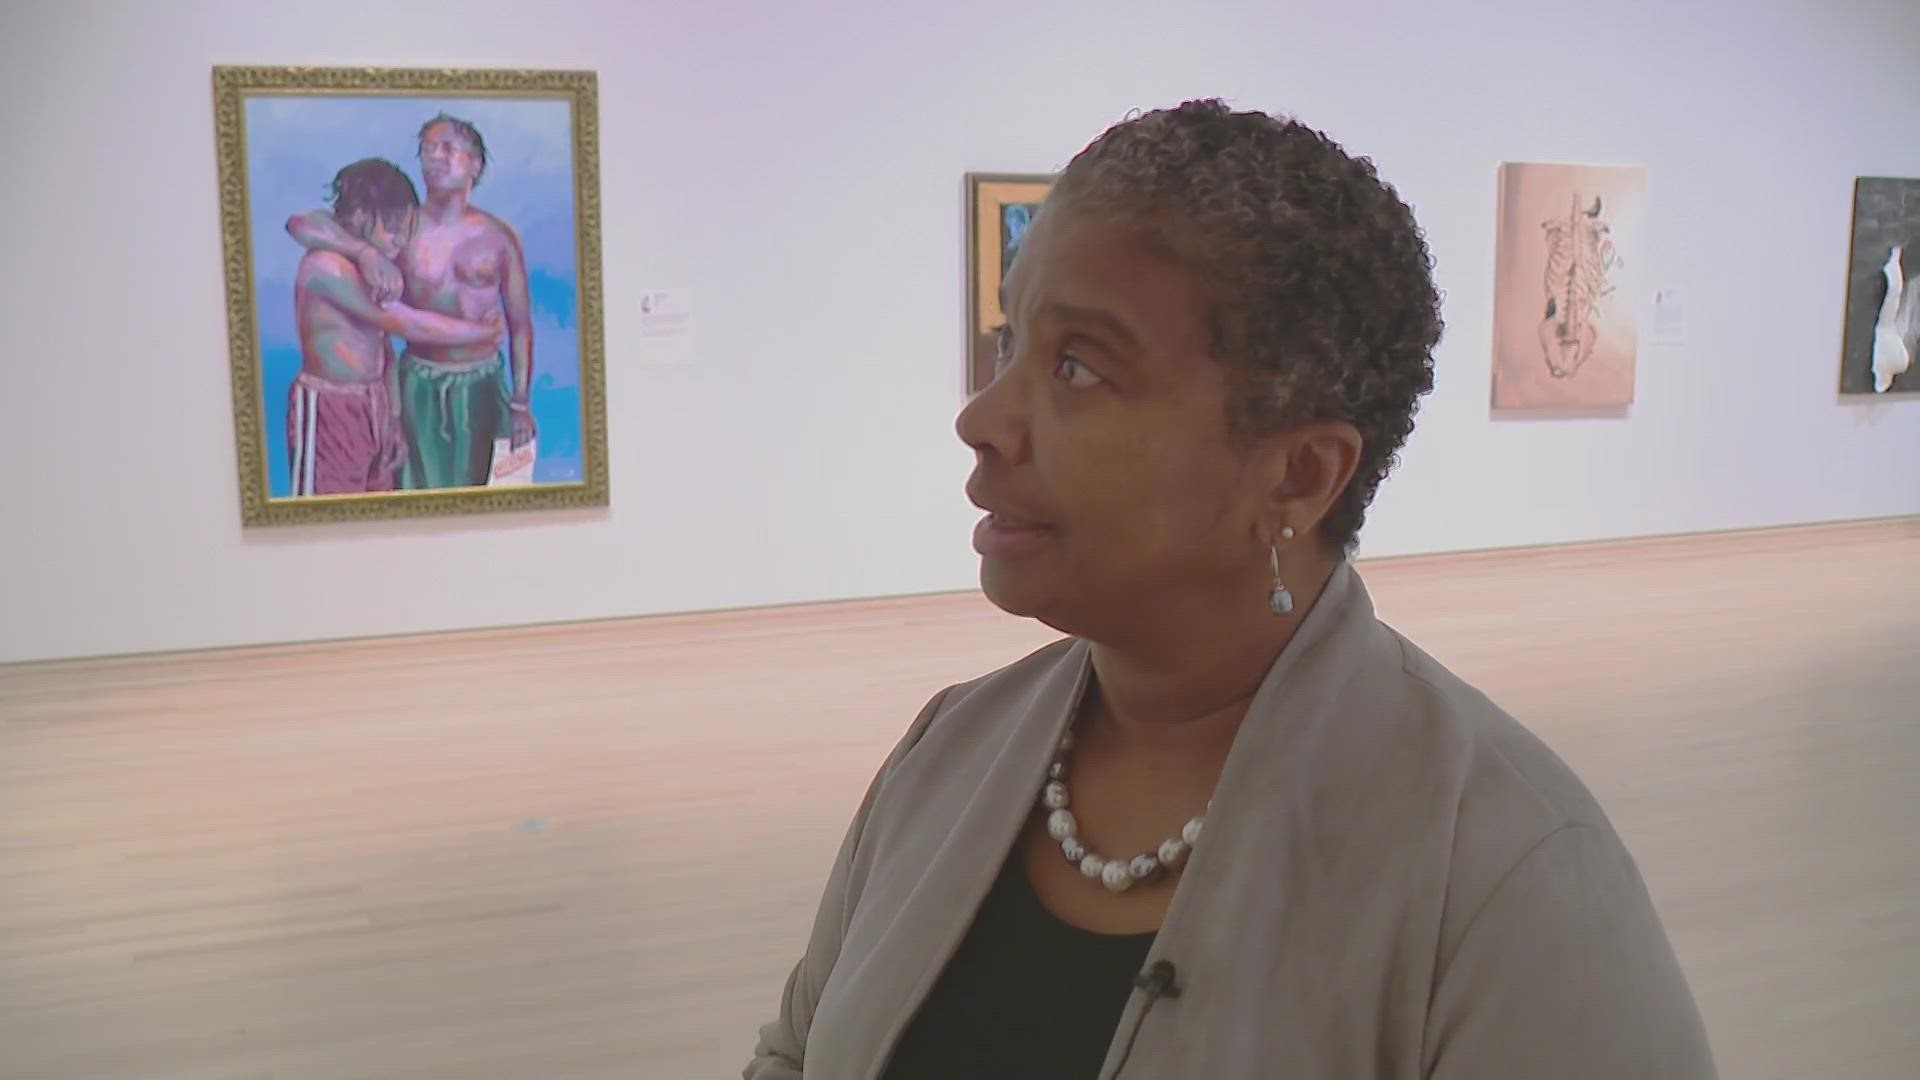 Dr. Colette Pierce Burnette opened up about her leadership role at Indiana's premiere art museum.